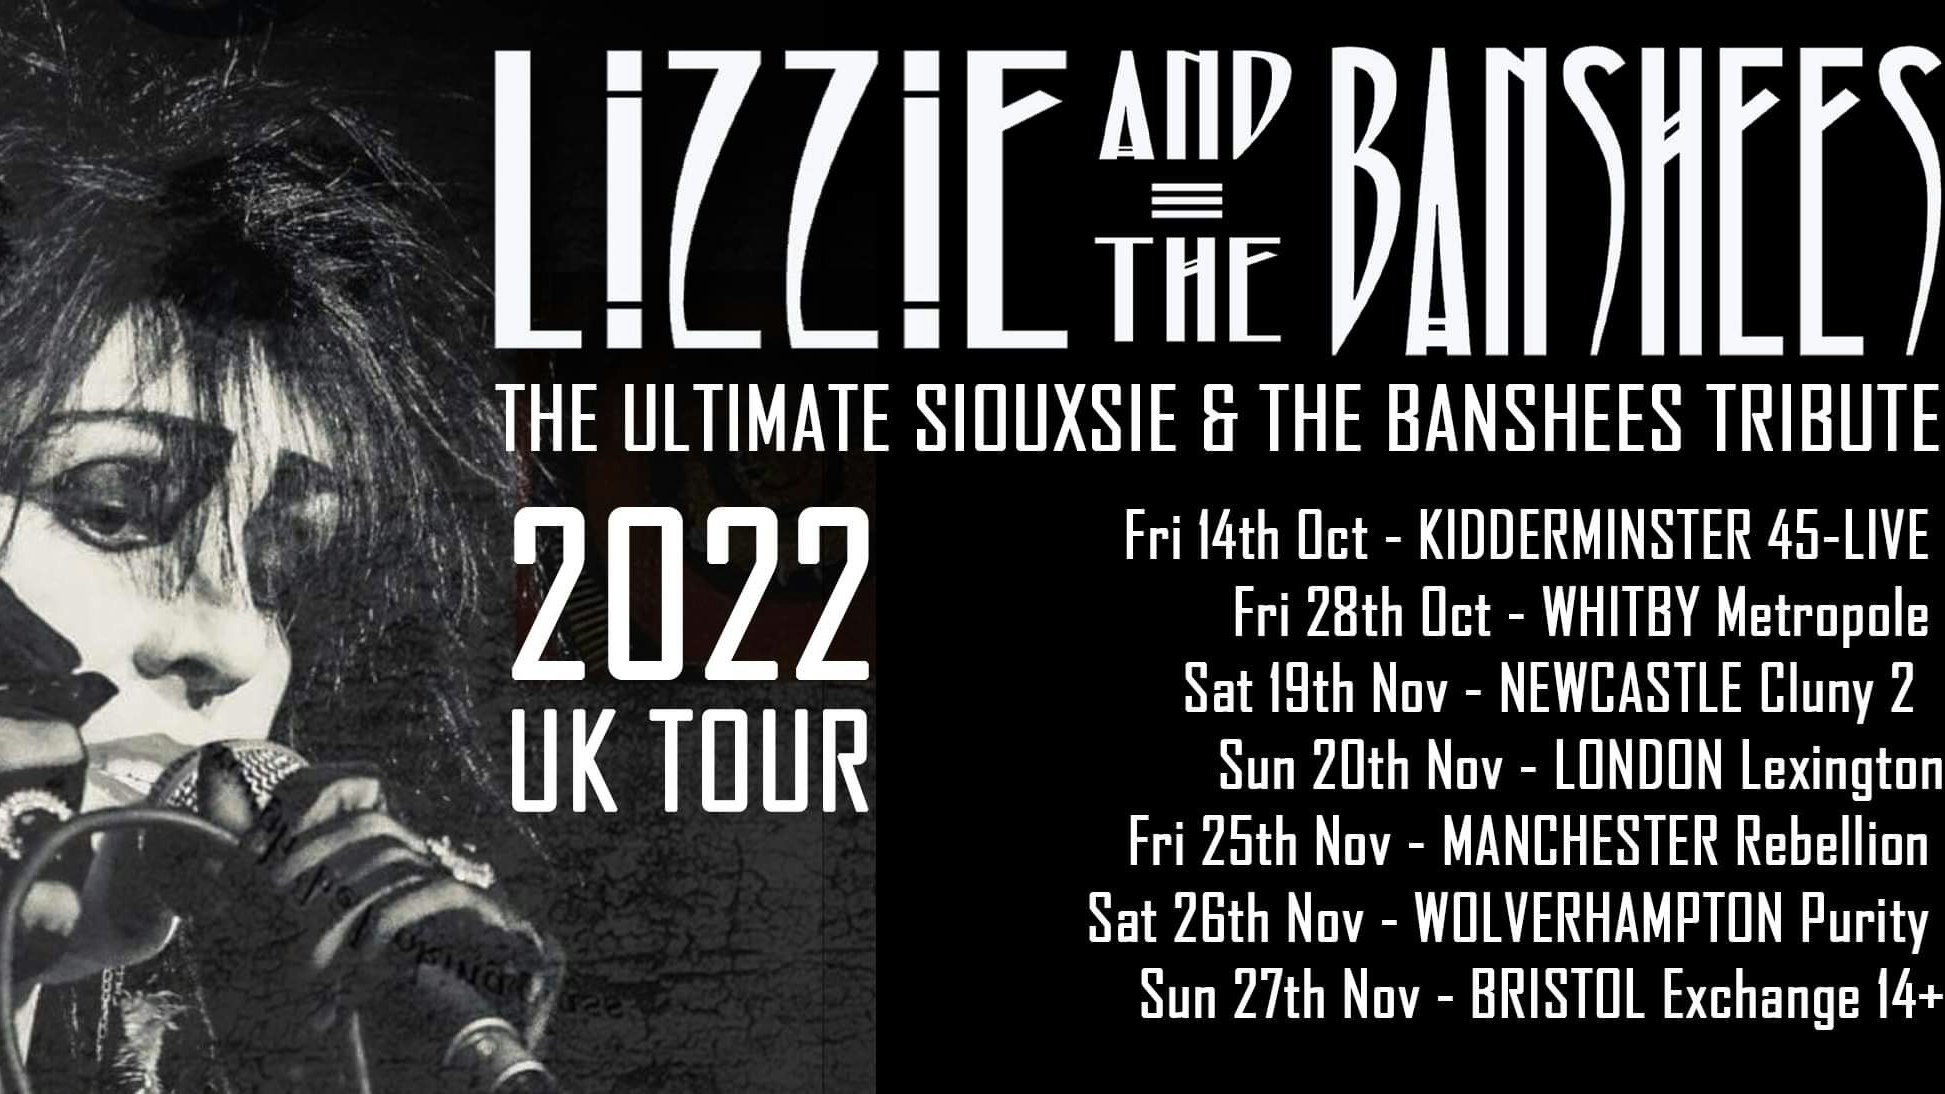 LIZZIE & THE BANSHEES – The Ultimate Siouxsie & The Banshee Tribute